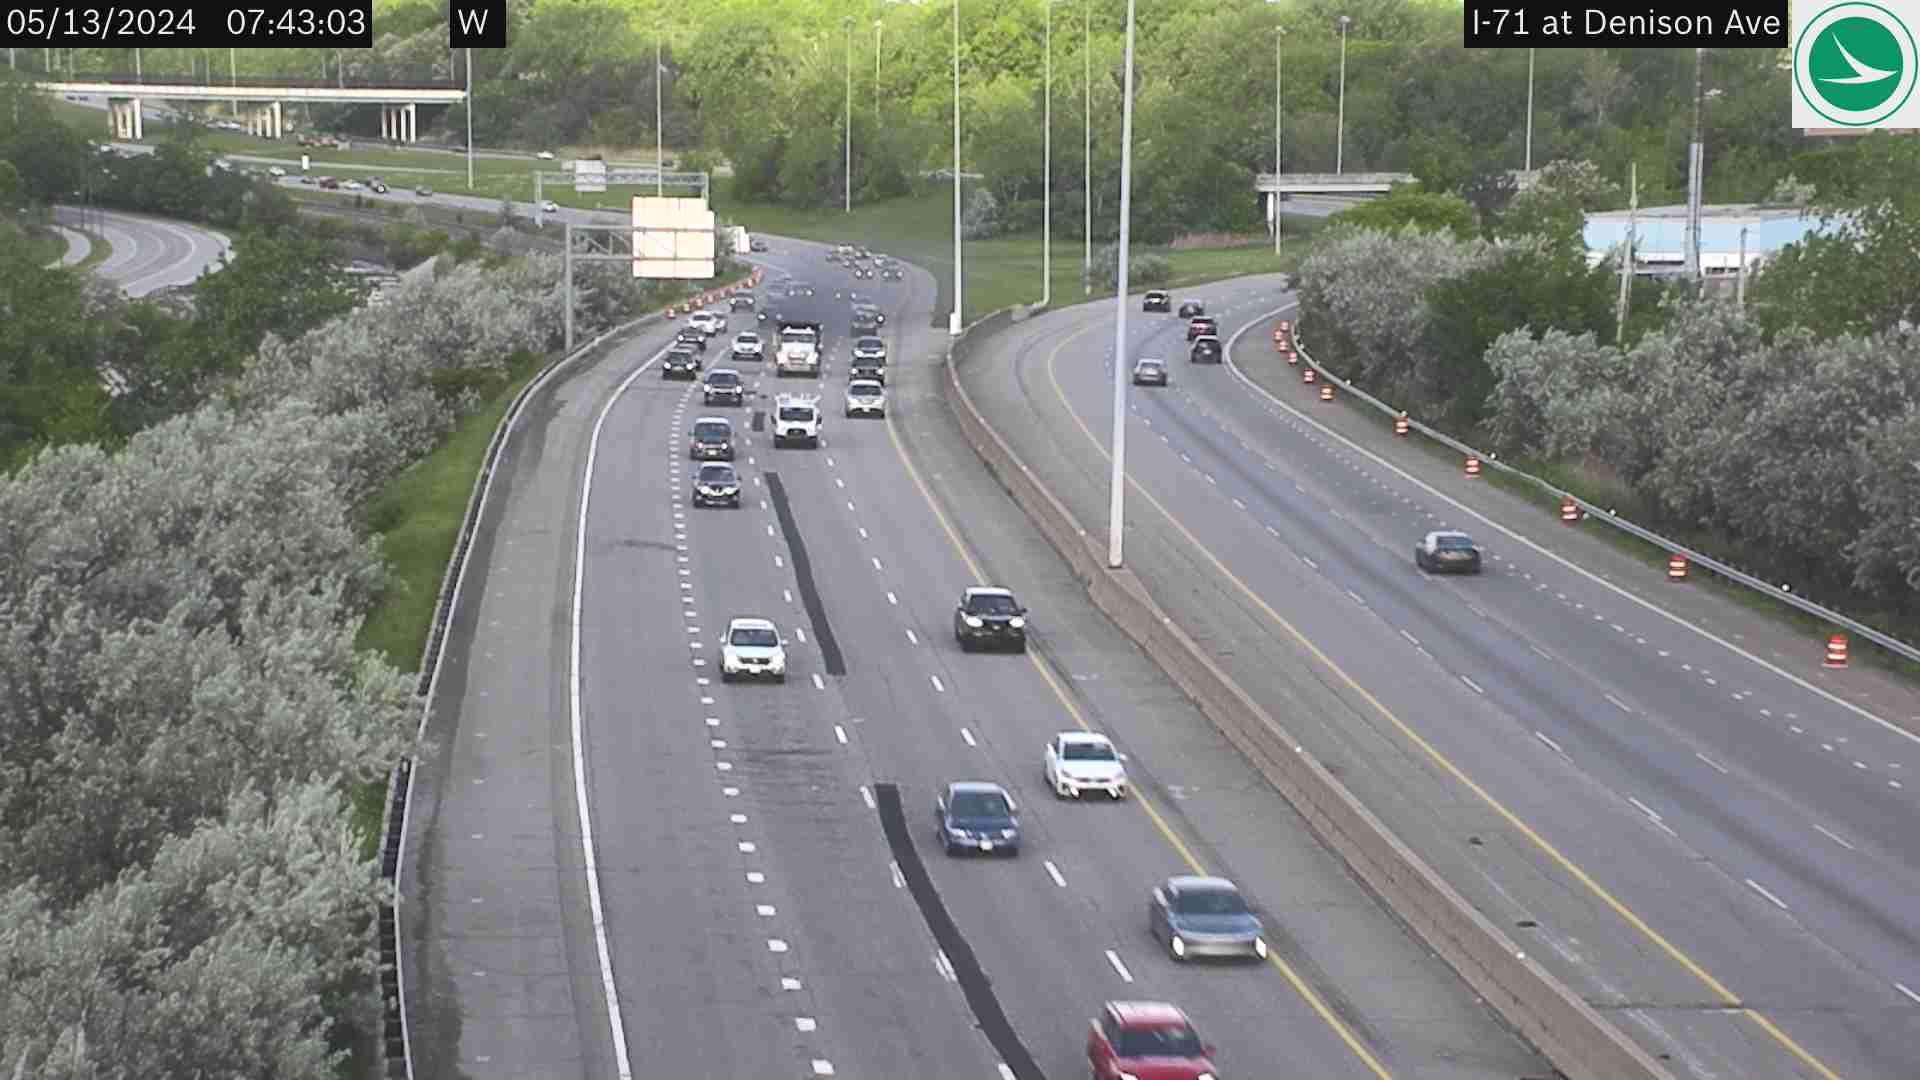 Traffic Cam Brooklyn Centre: I-71 at Denison Ave Player